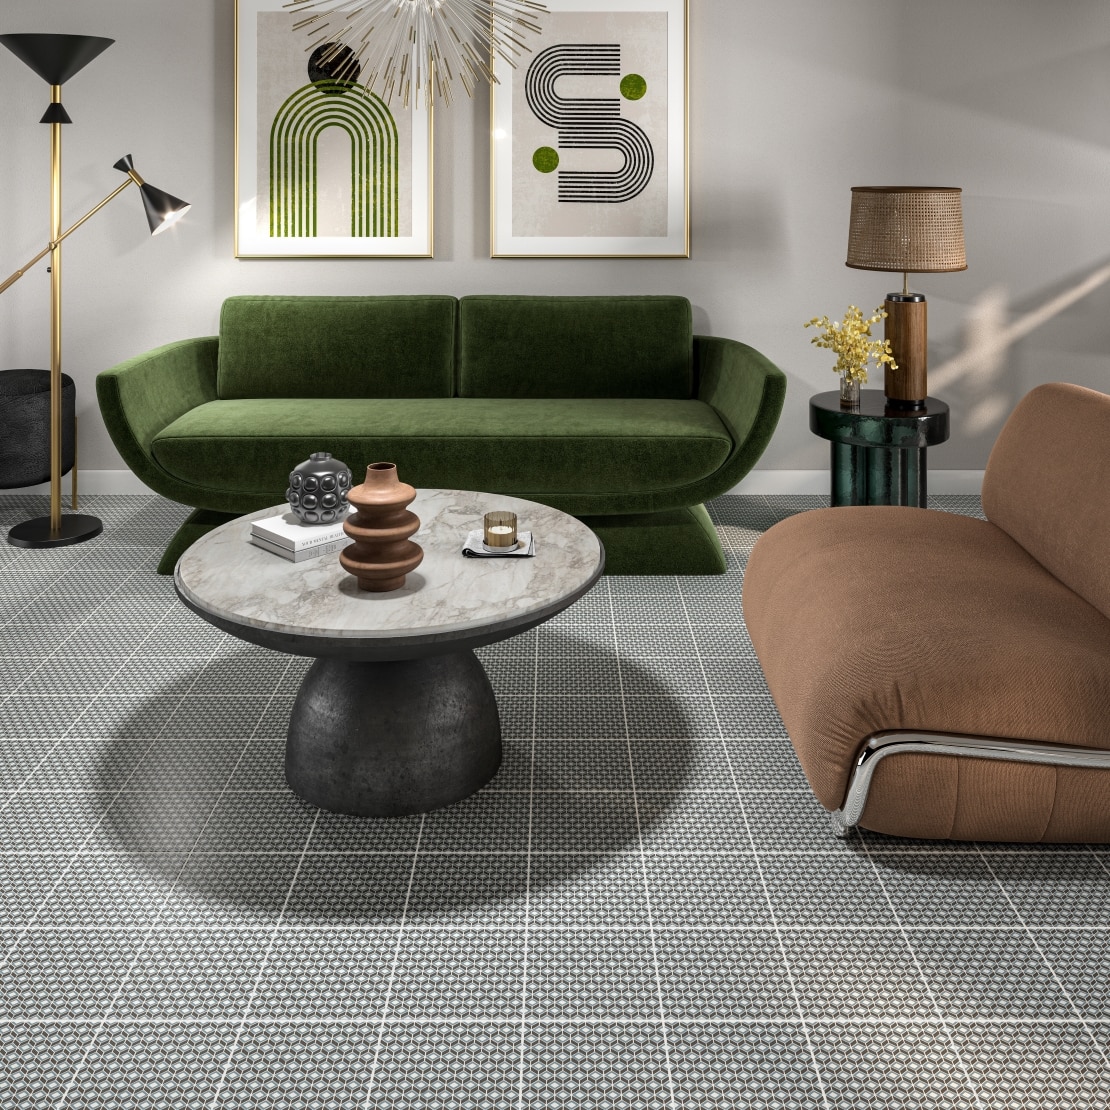 Retro inspired living room with a green couch, leather couch and patterned floor tile.